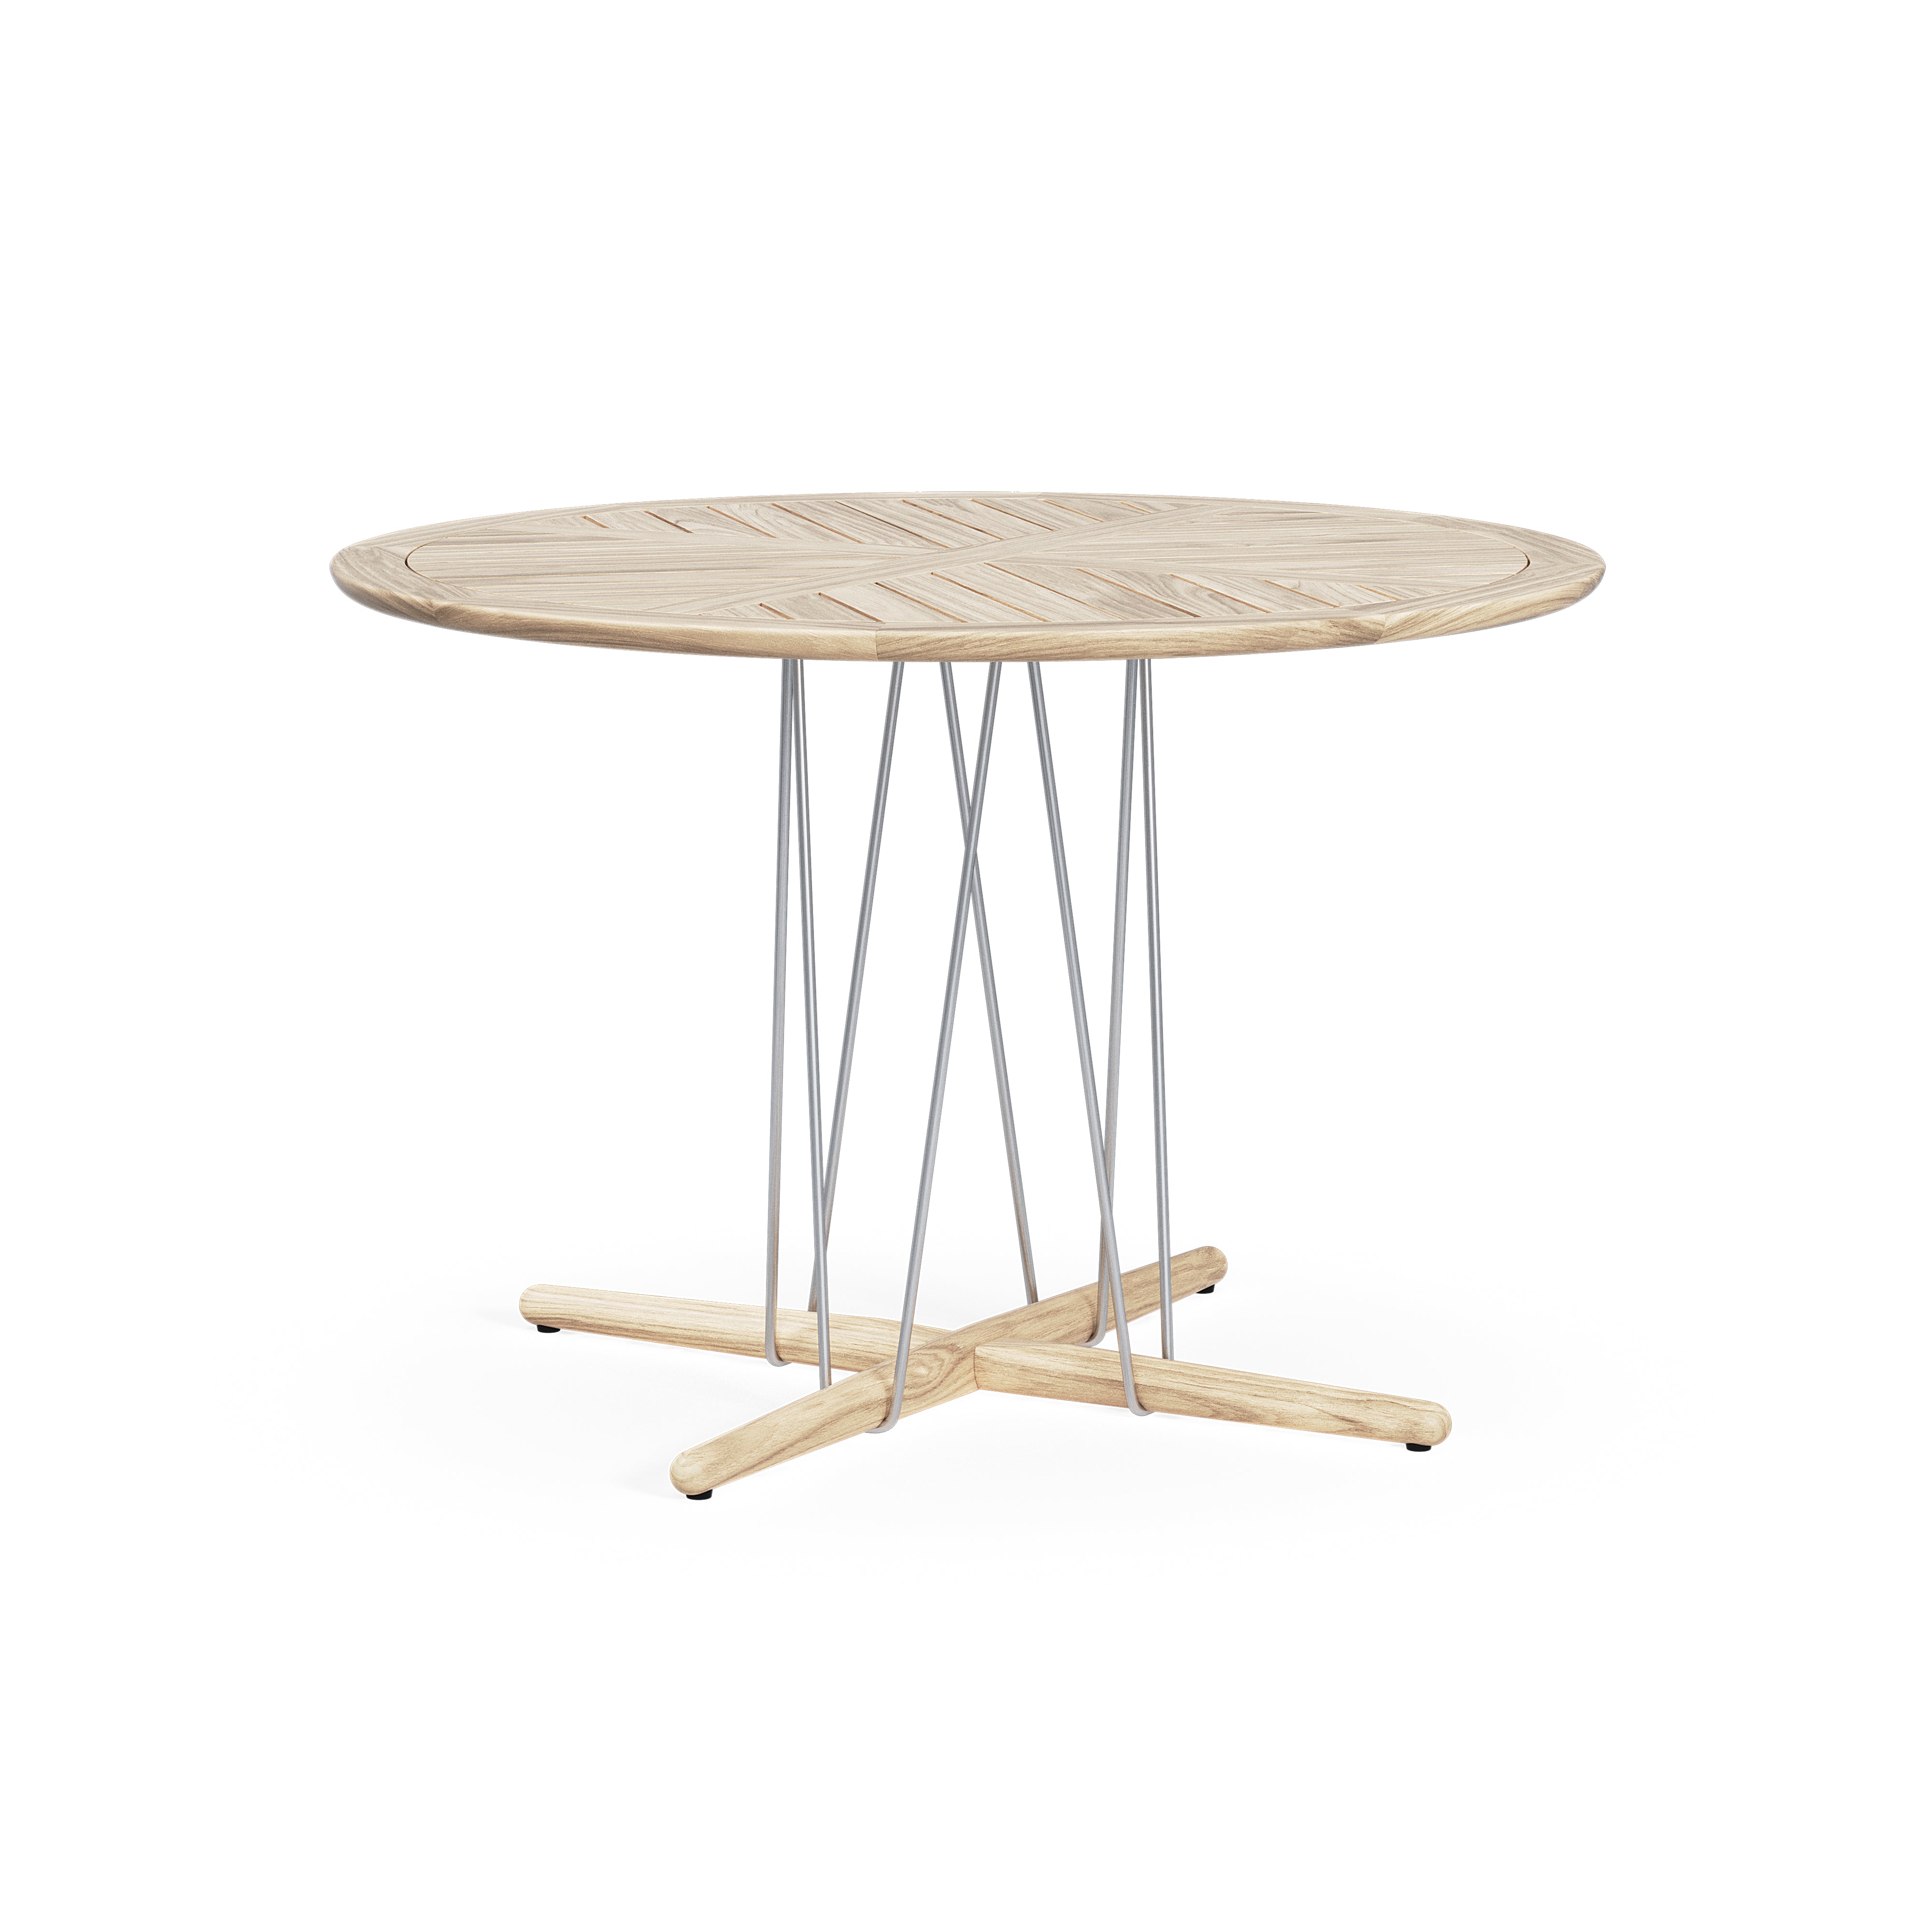 E022 Embrace Outdoor Dining Table: Medium - 43.3